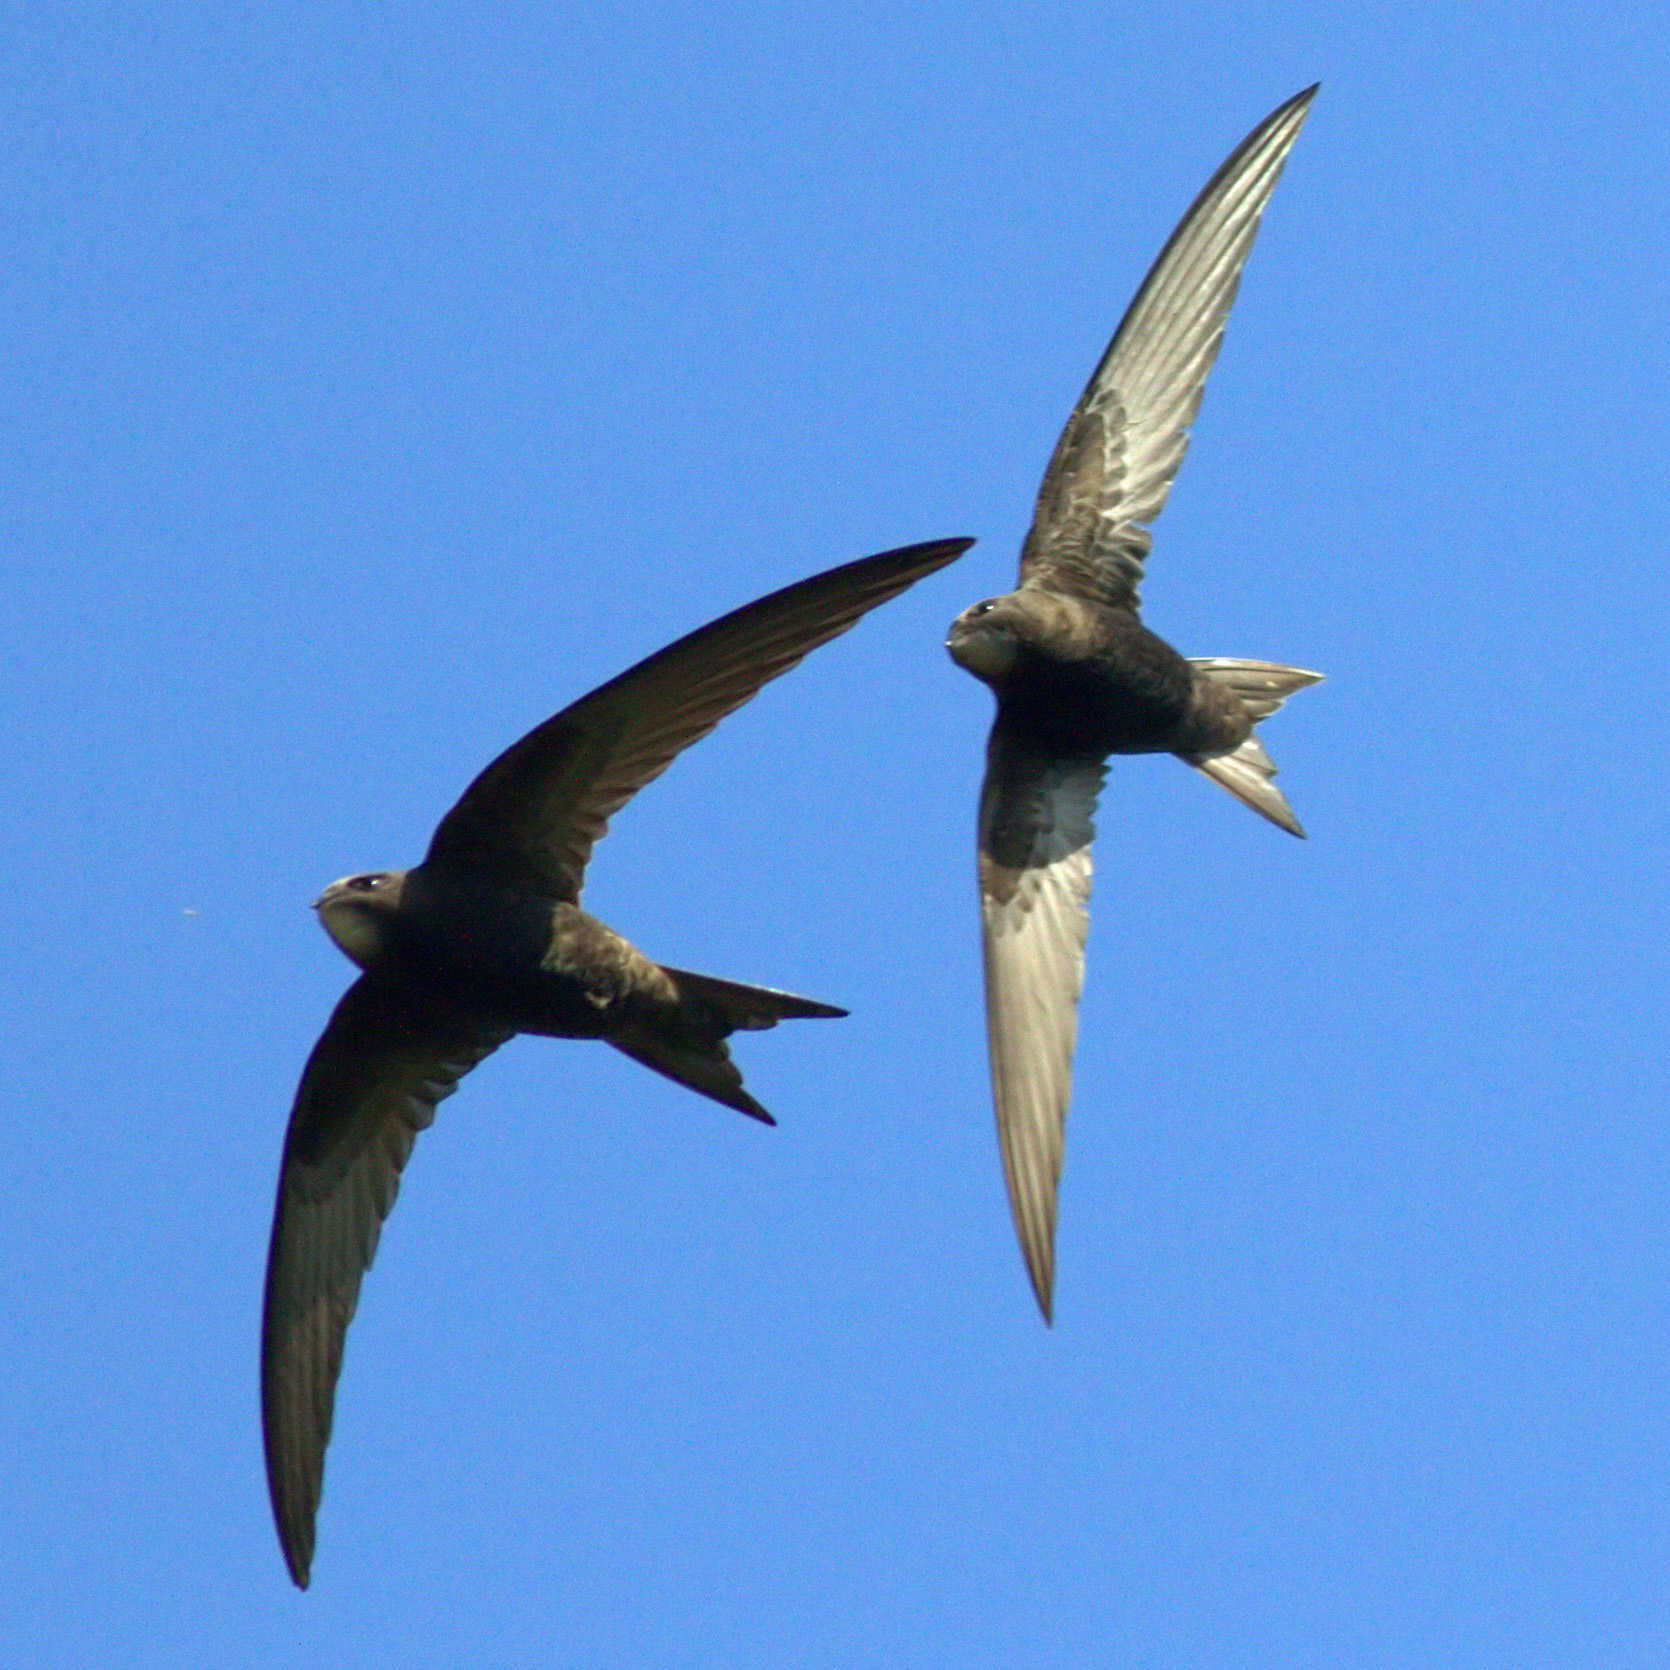 a pair of swifts in flight